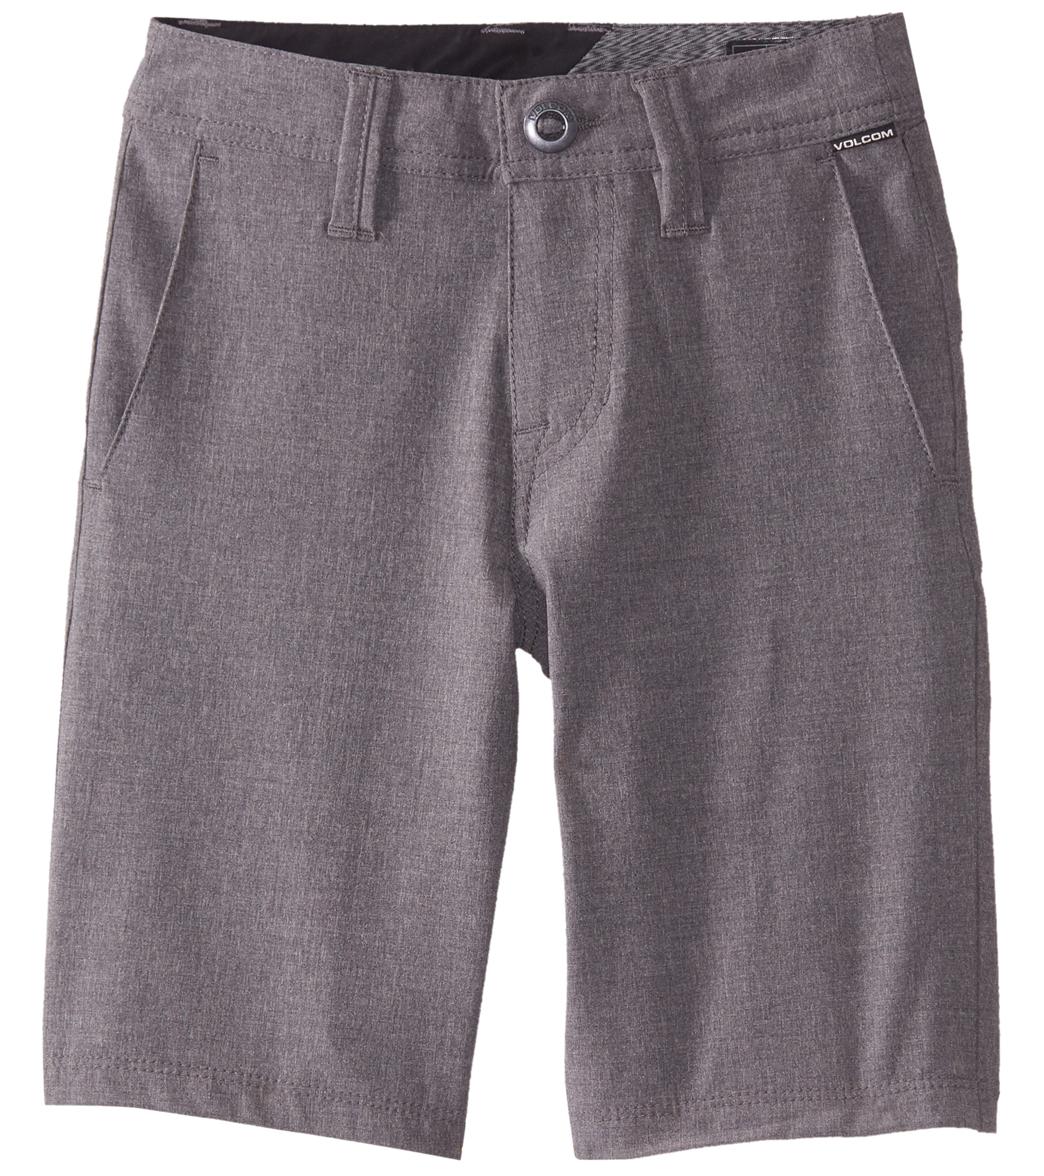 Volcom Boys' Frickin Snt Static Short Toddler/Little/Big Kid - Charcoal Heather 22 Cotton/Polyester - Swimoutlet.com